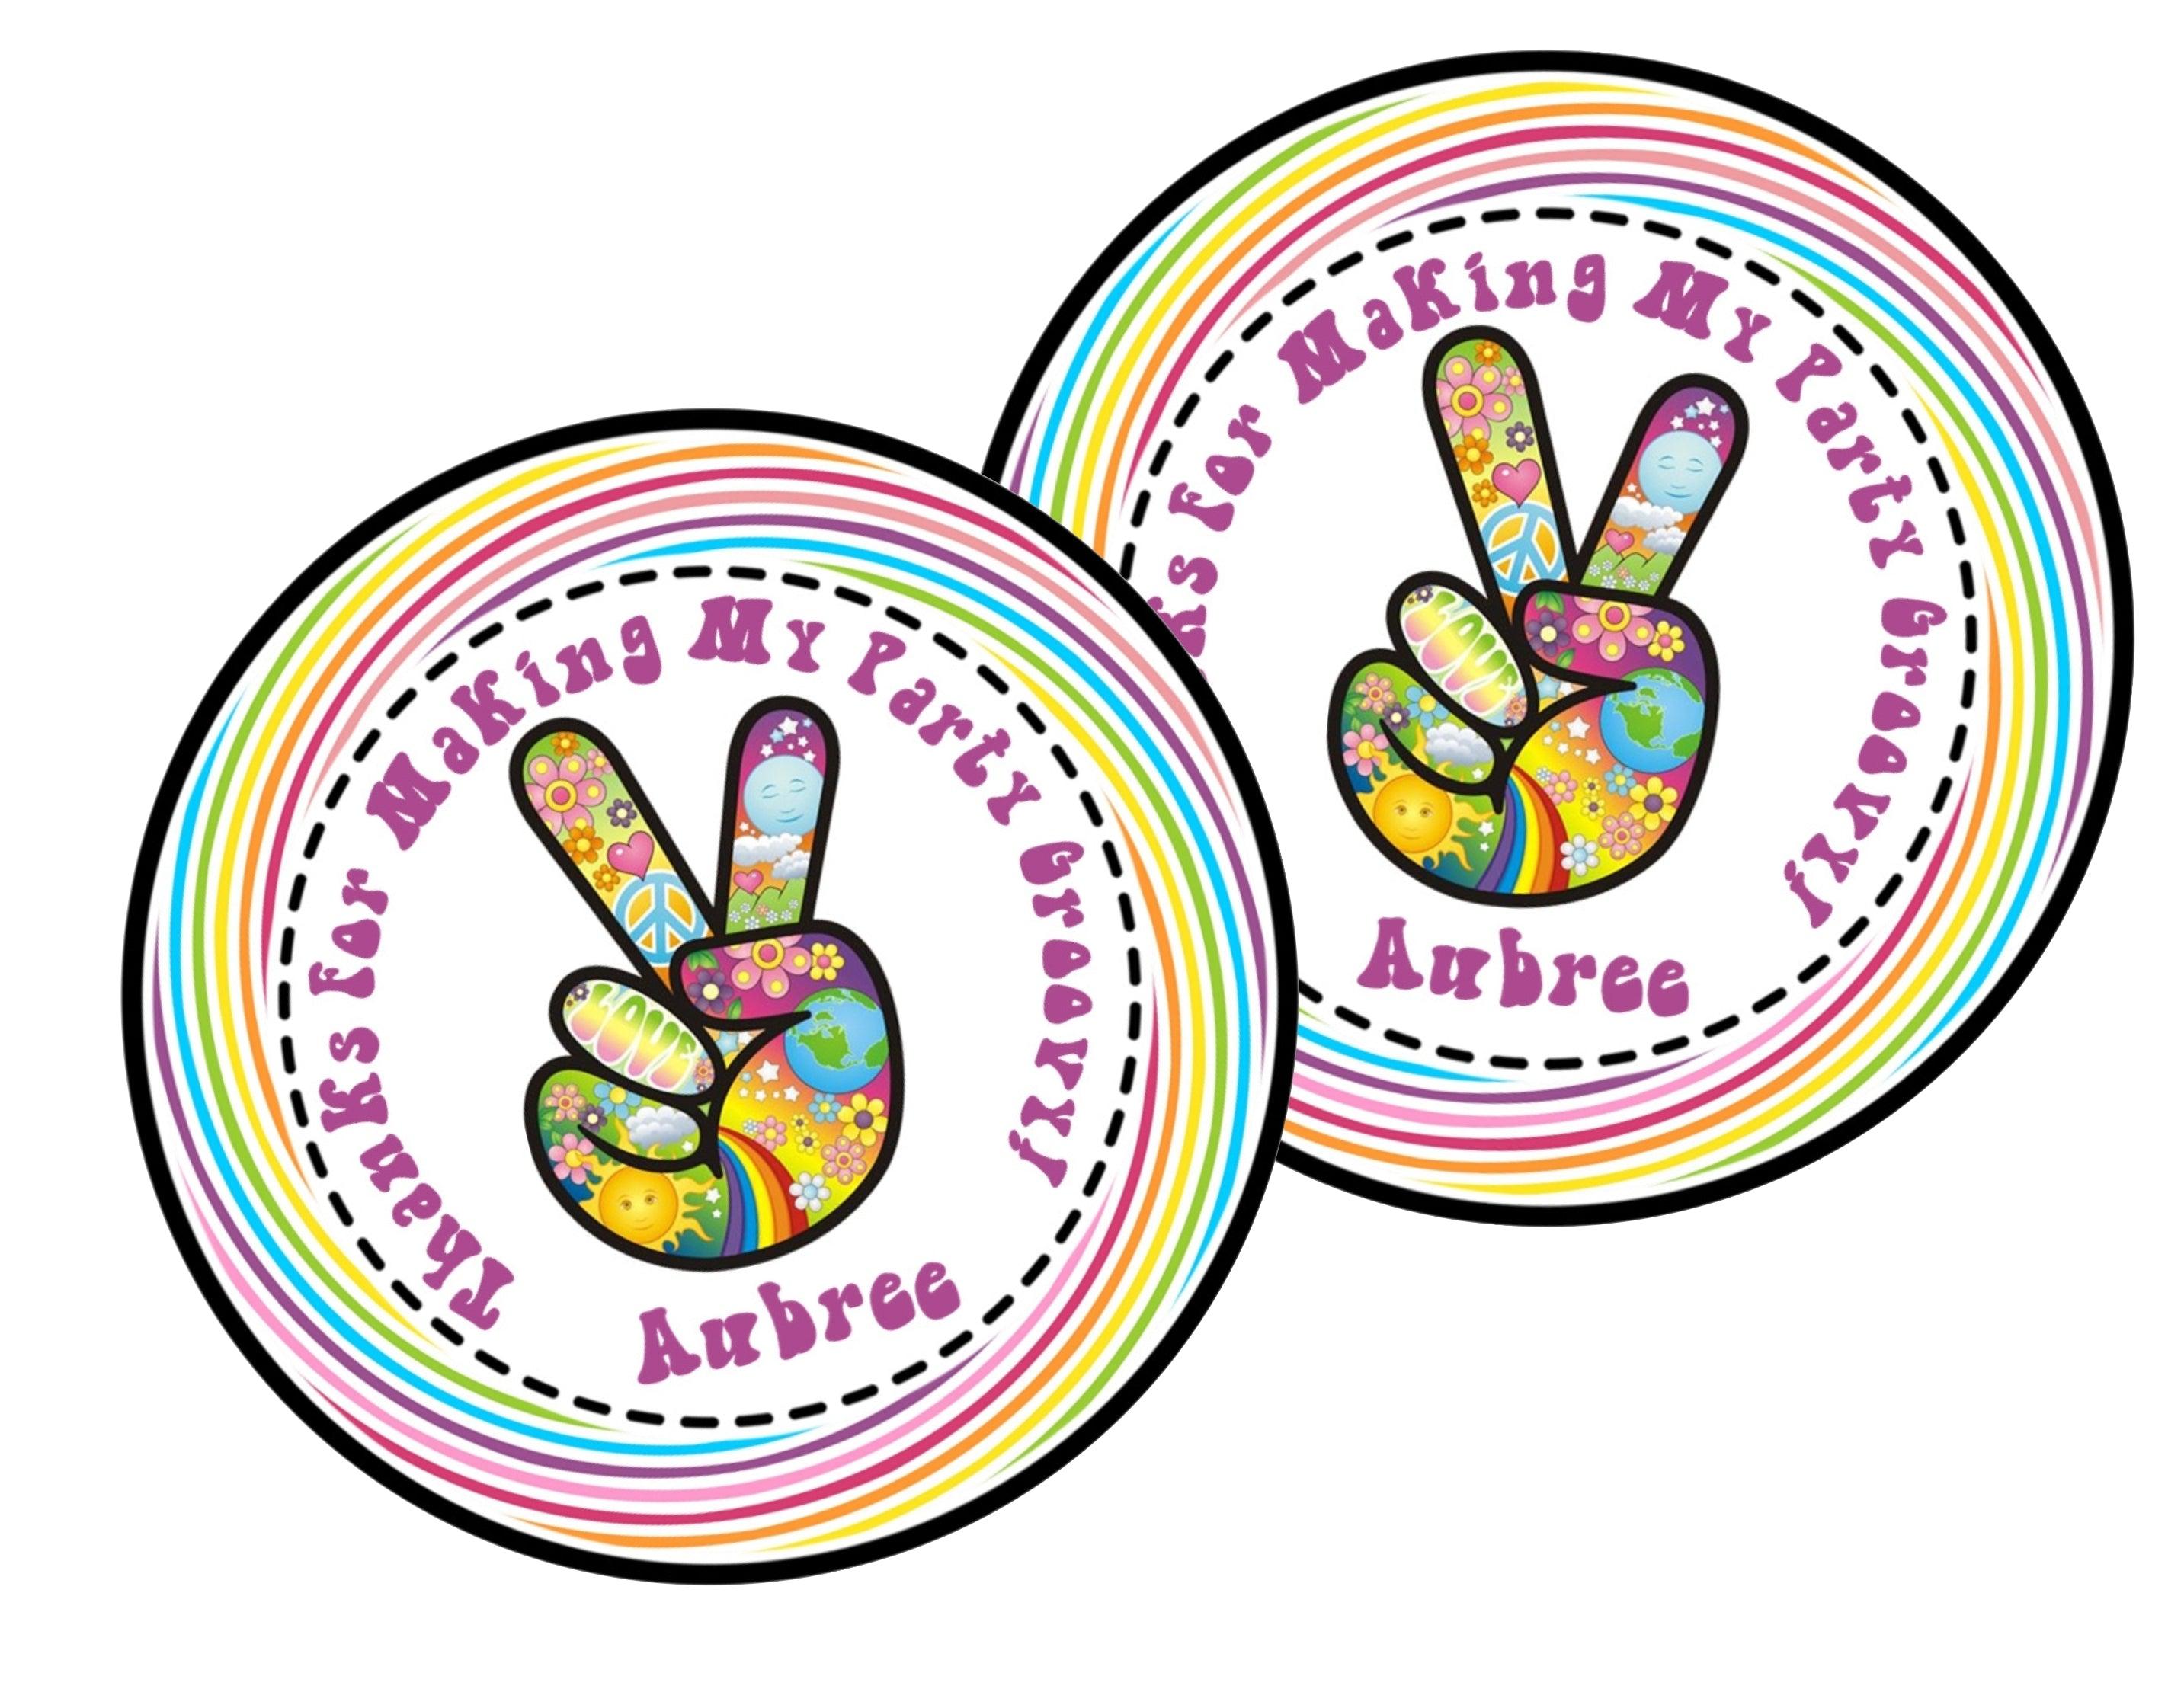 1970's Hippie Birthday Party Stickers Or Favor Tags